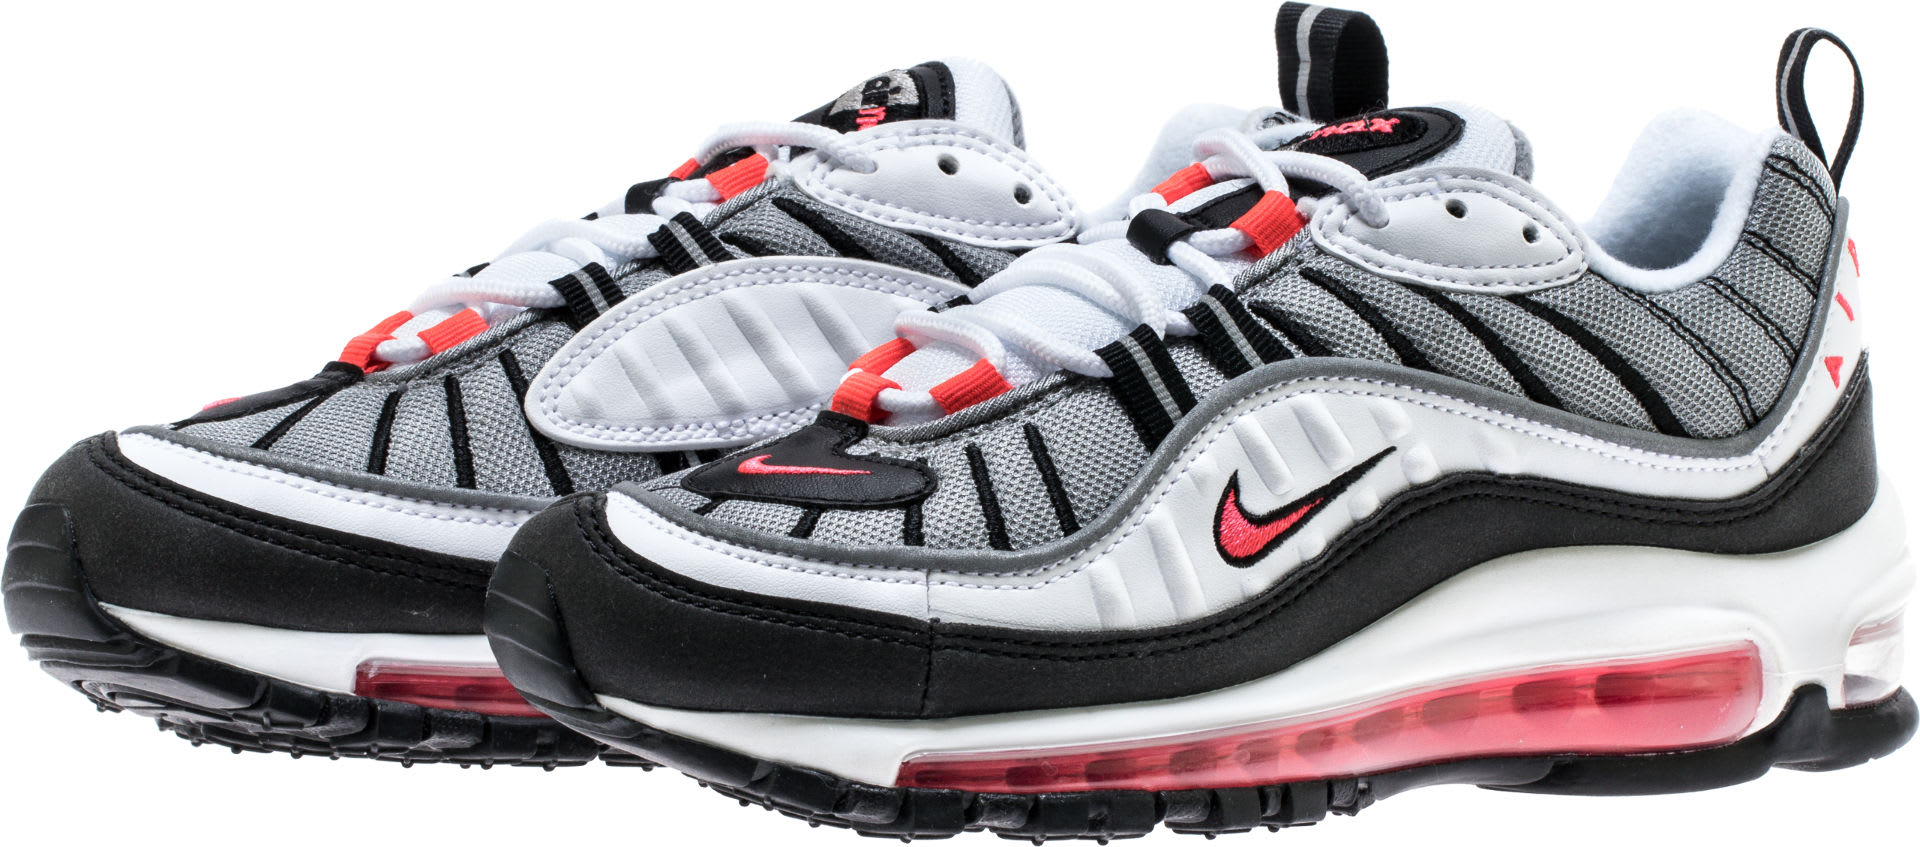 Nike WMNS Air Max 98 Solar Red Release Date AH6799-104 Front